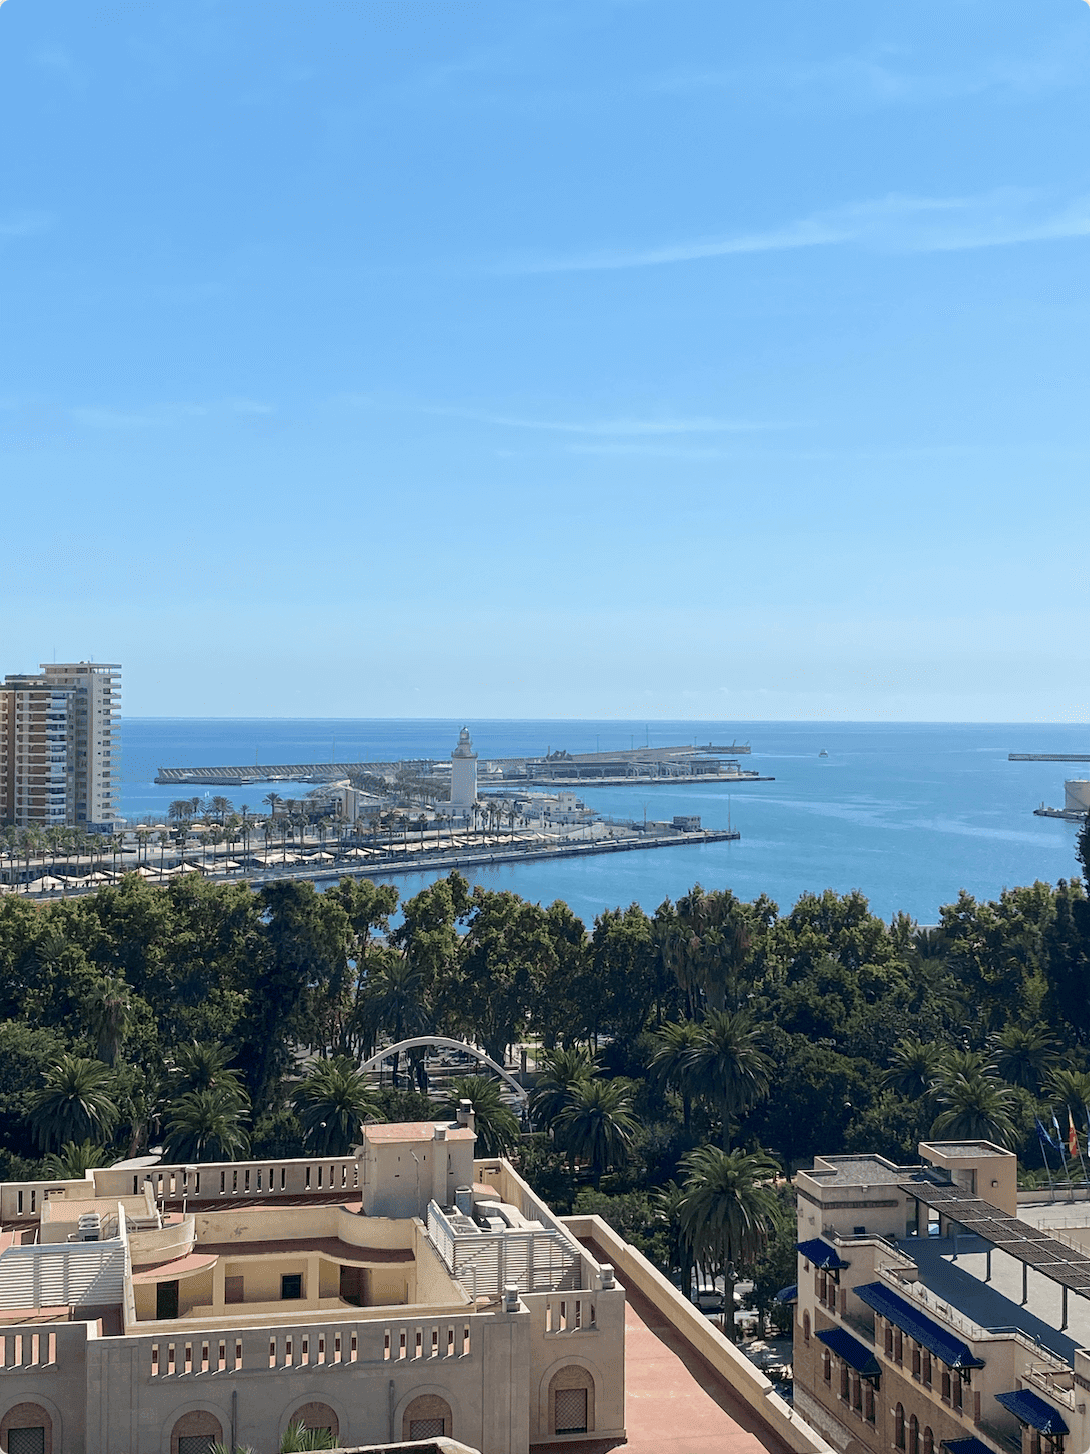 Malaga Cruise Port seen from a viewpoint in the city on a sunny day.